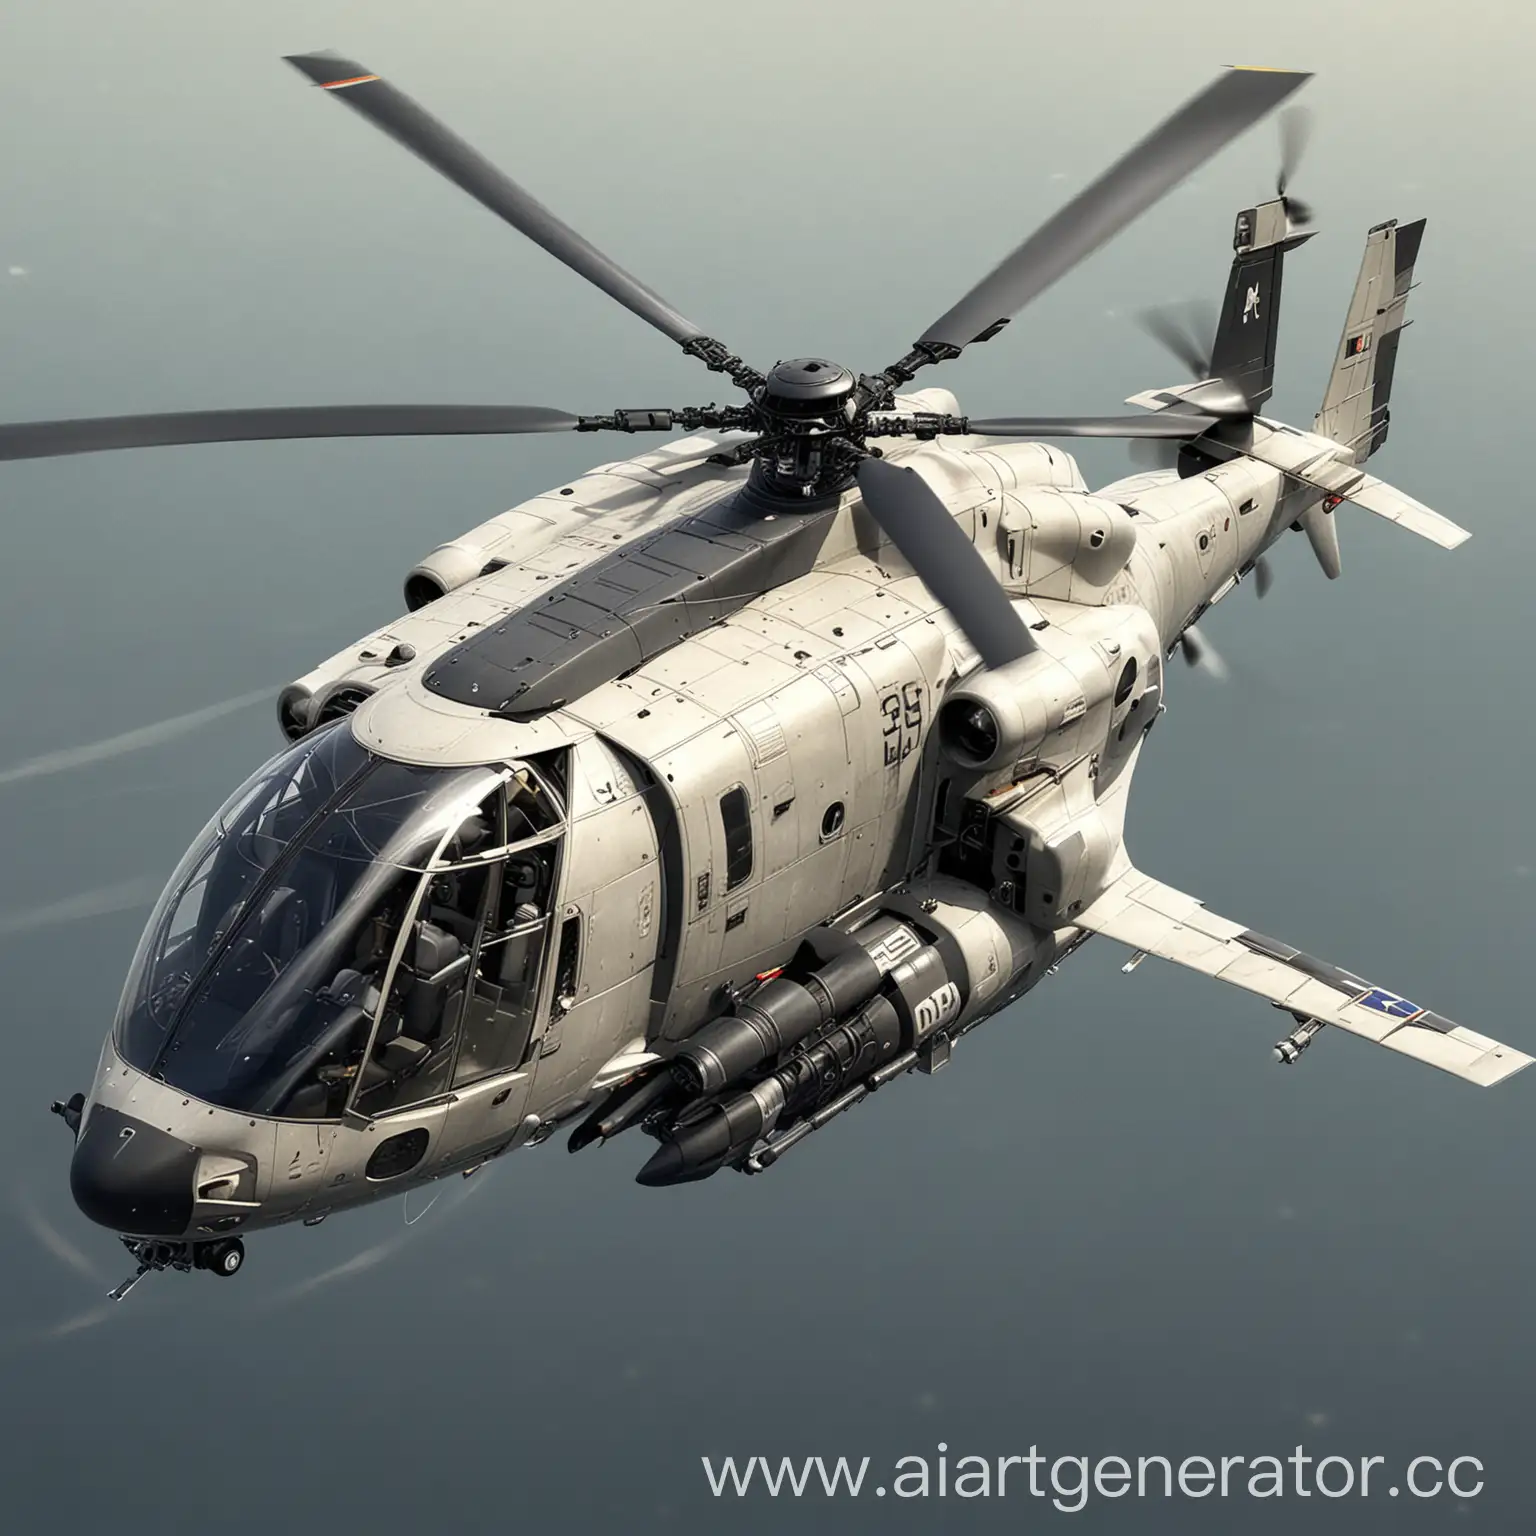 Futuristic-Military-Helicopter-Streamlined-Design-for-Neat-Operations